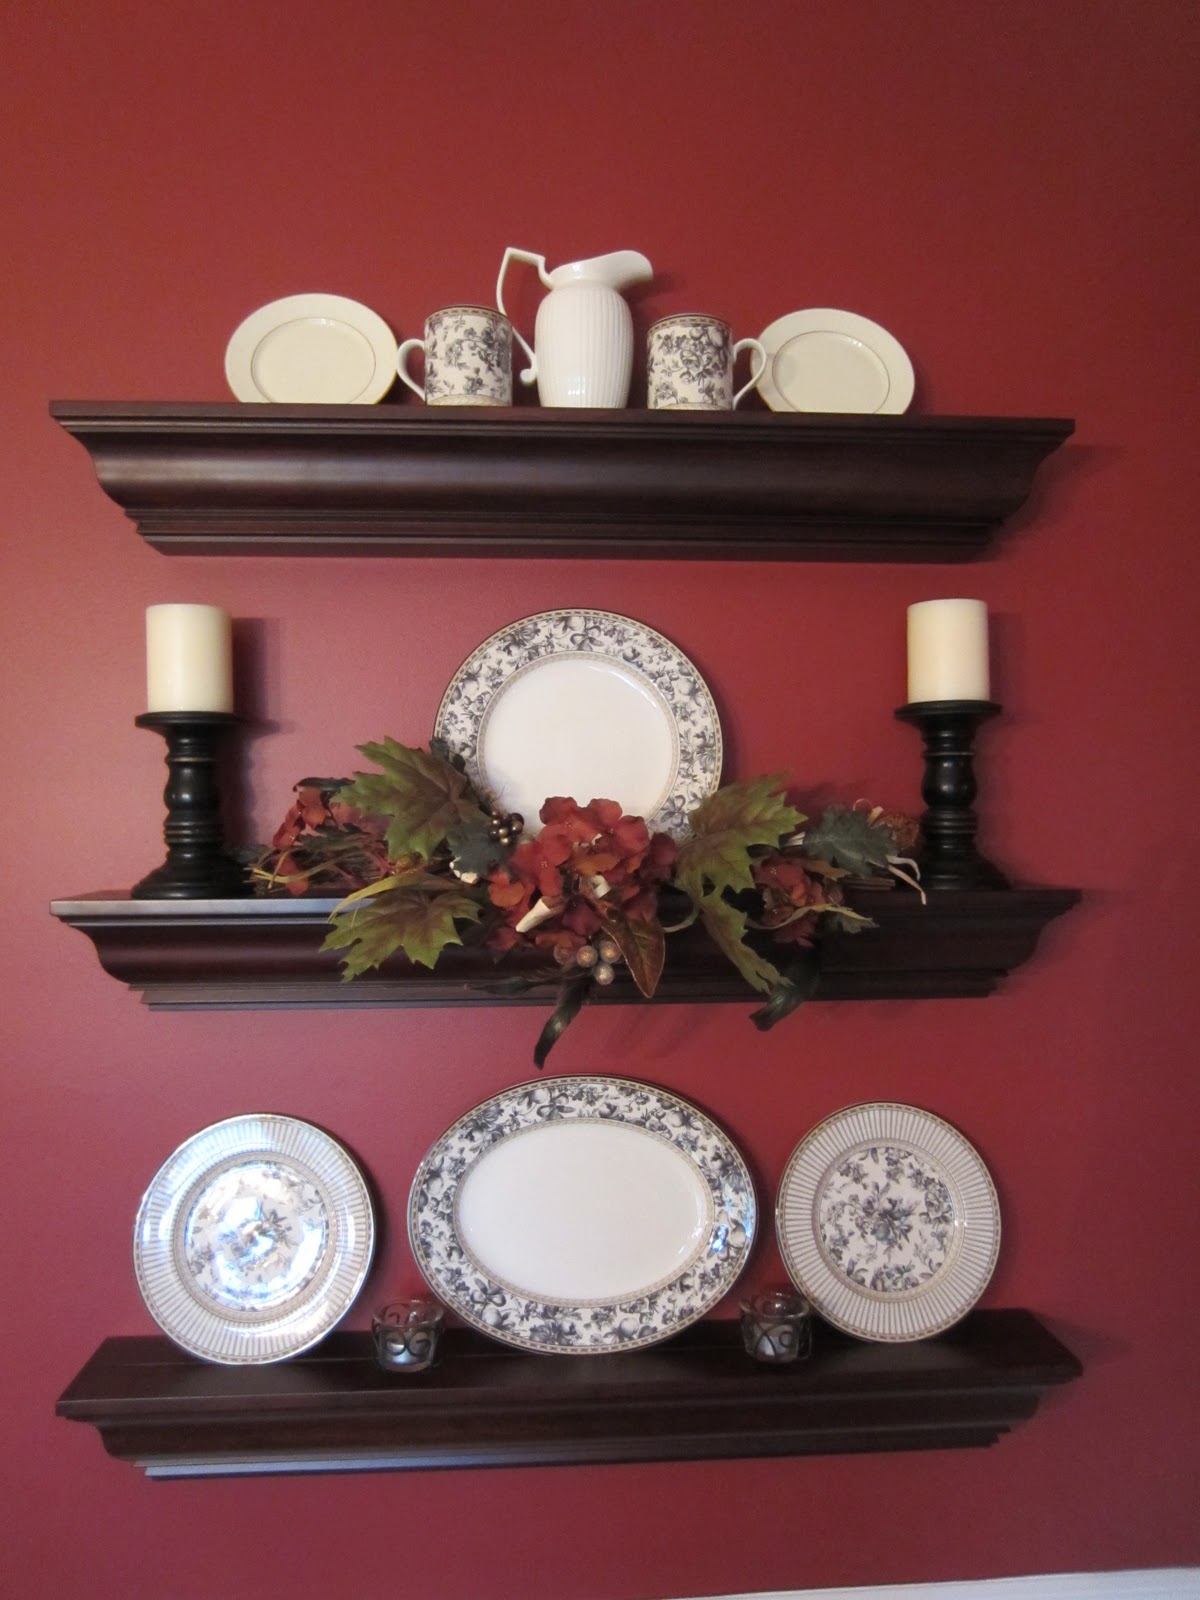 Wall Shelves in dining room decorated for fall